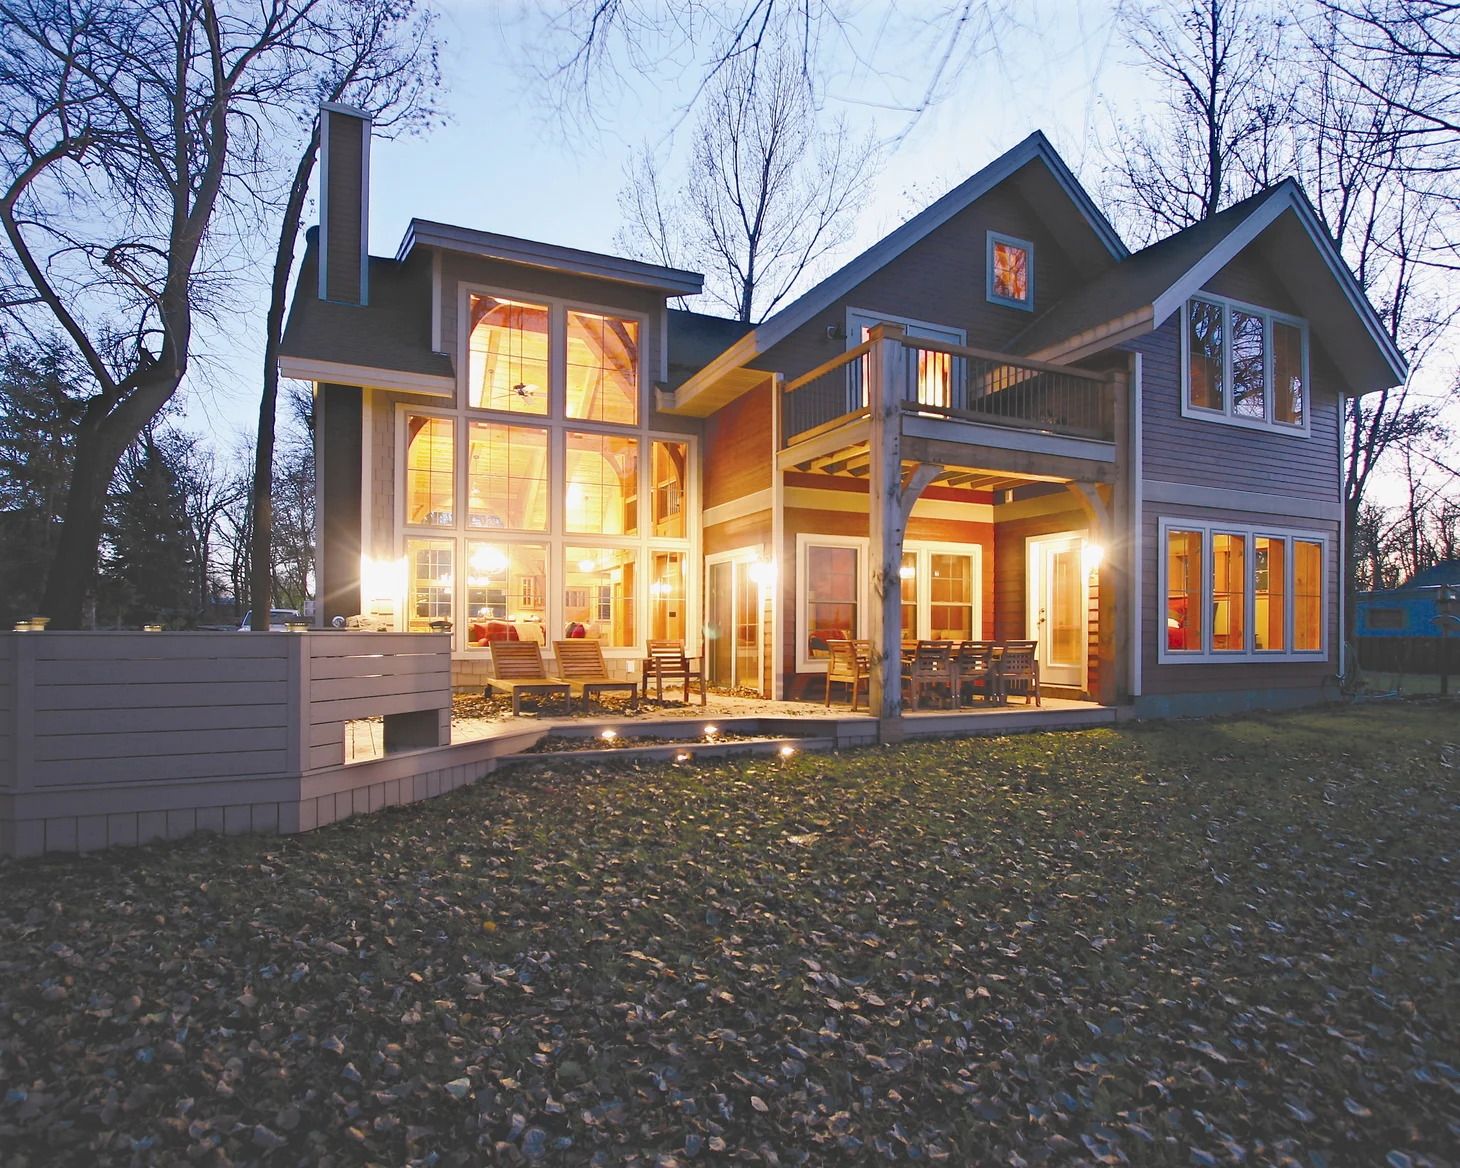 exterior of timber-frame home built with structural insulate panels; warminterior lighting sines from huge windows; setting shows bare trees and fallen leaves on the lawn - photo